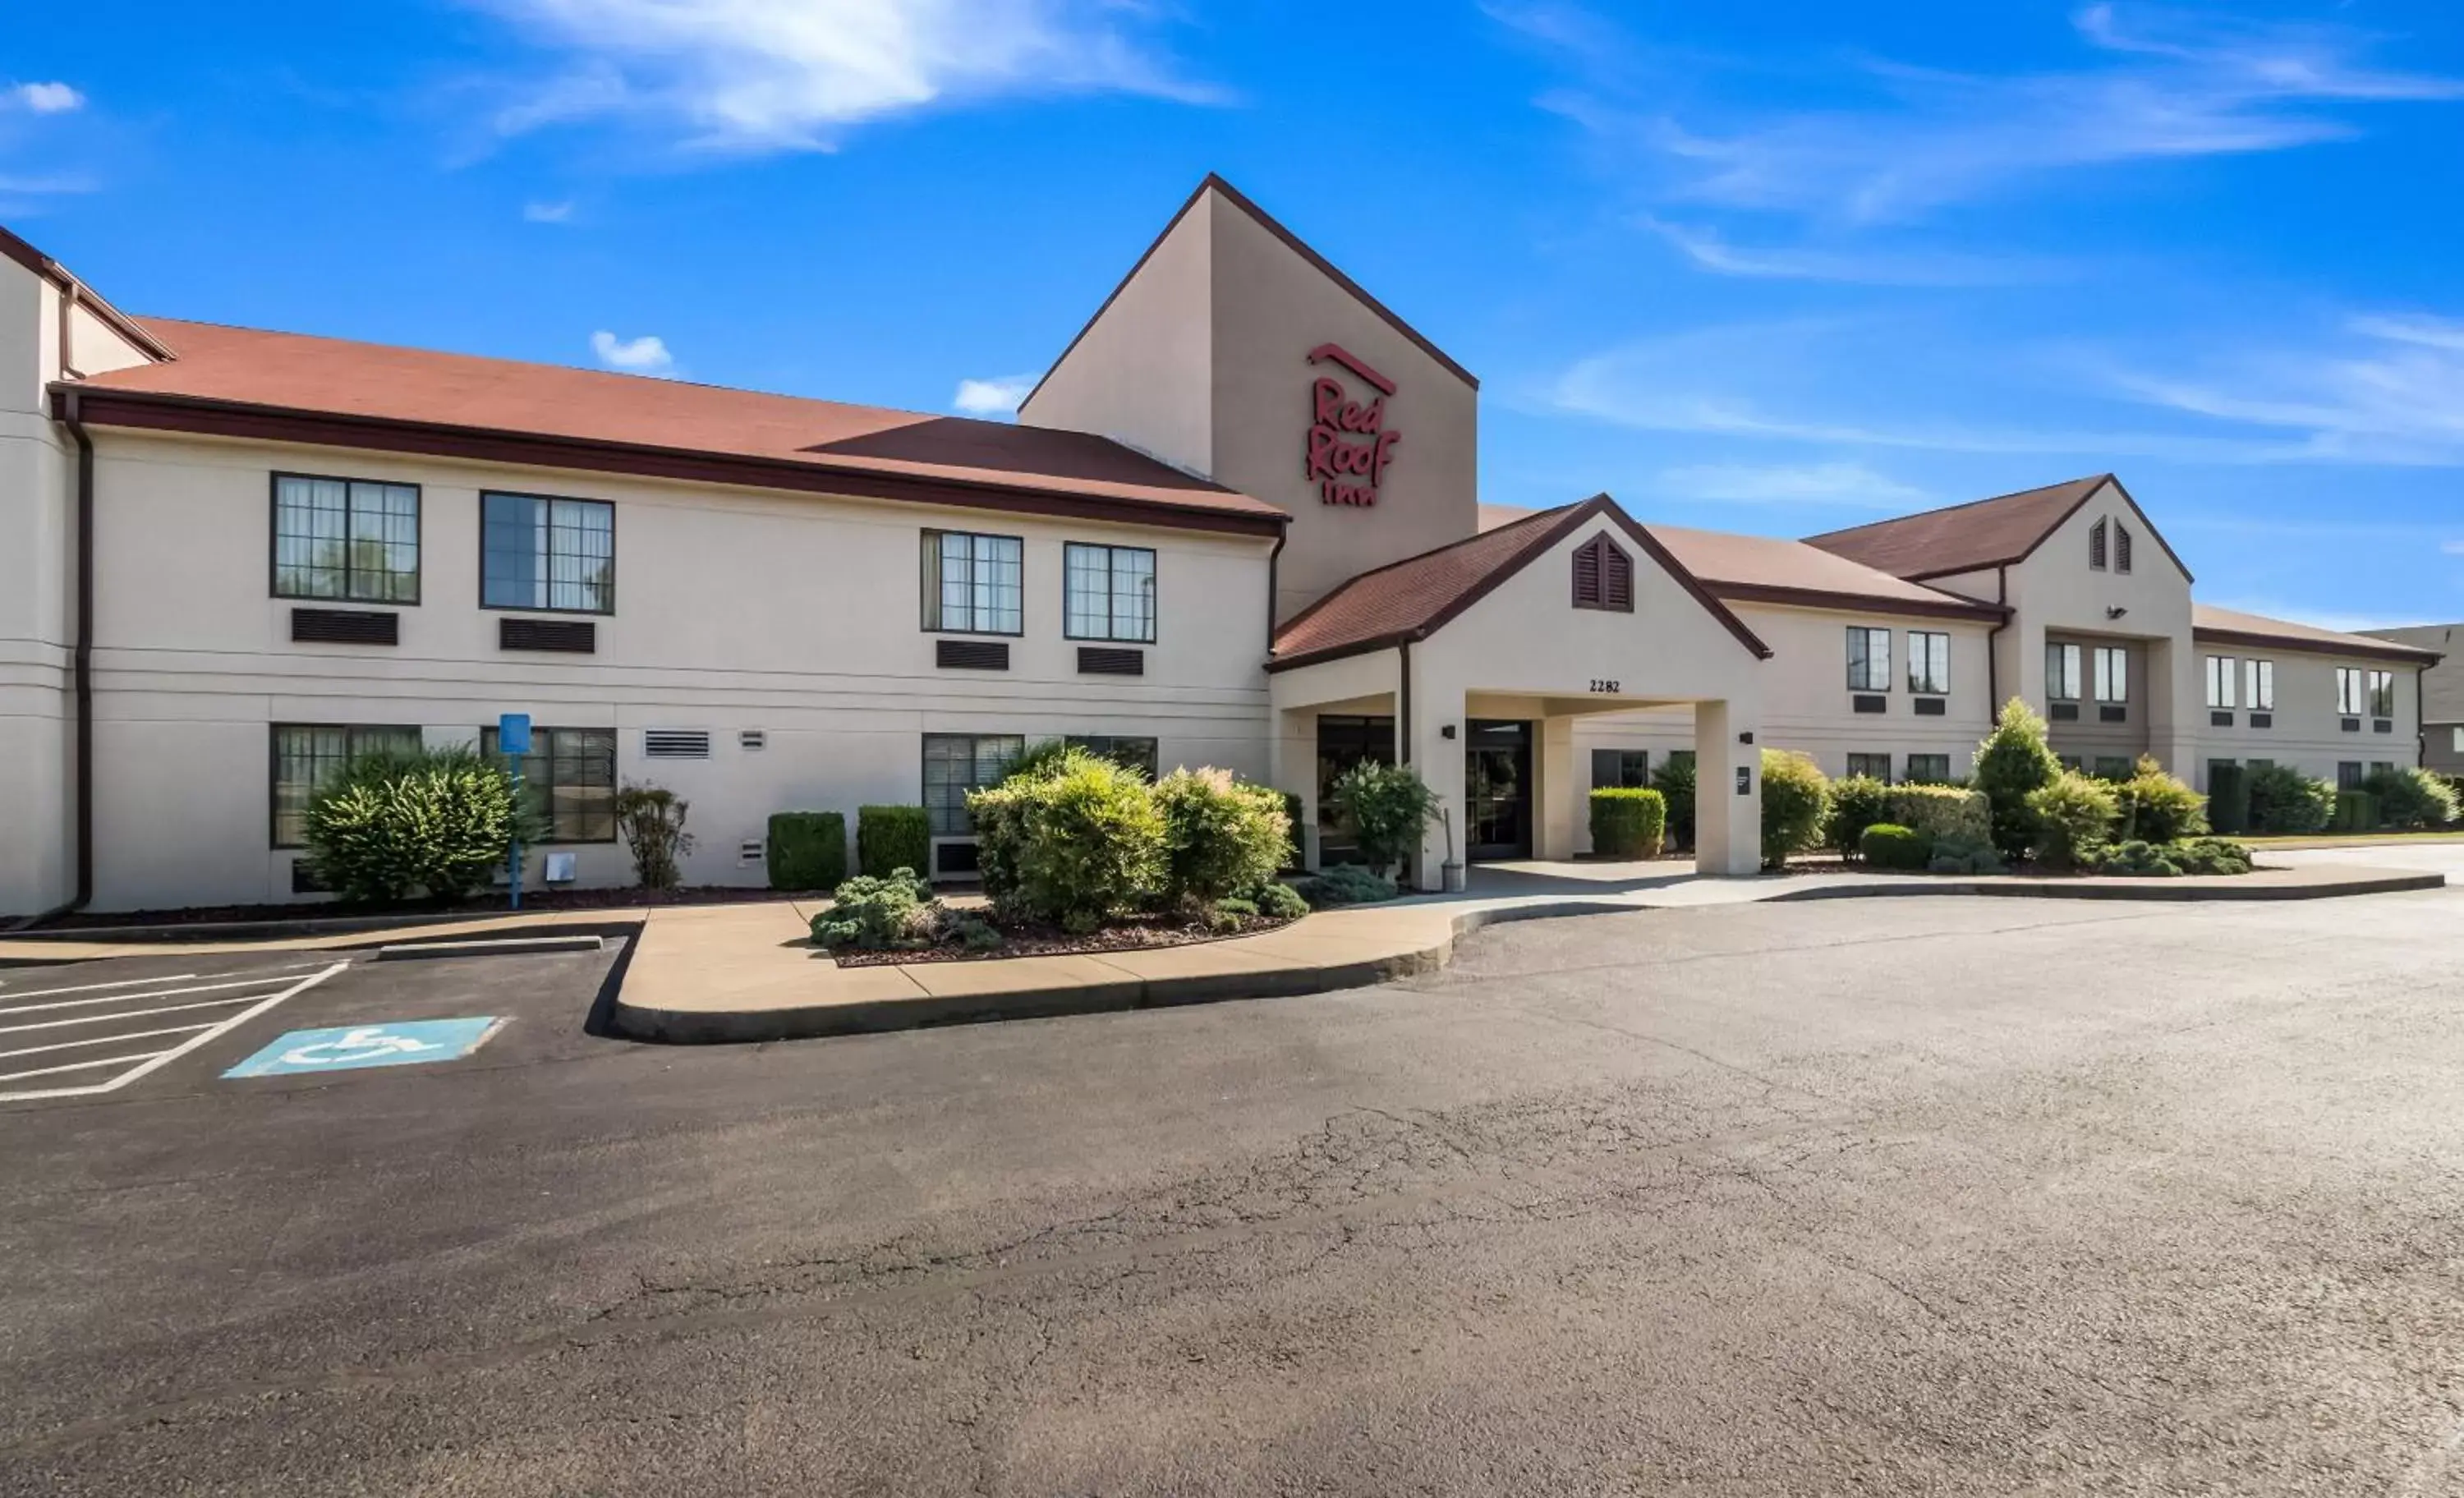 Property Building in Red Roof Inn Murfreesboro